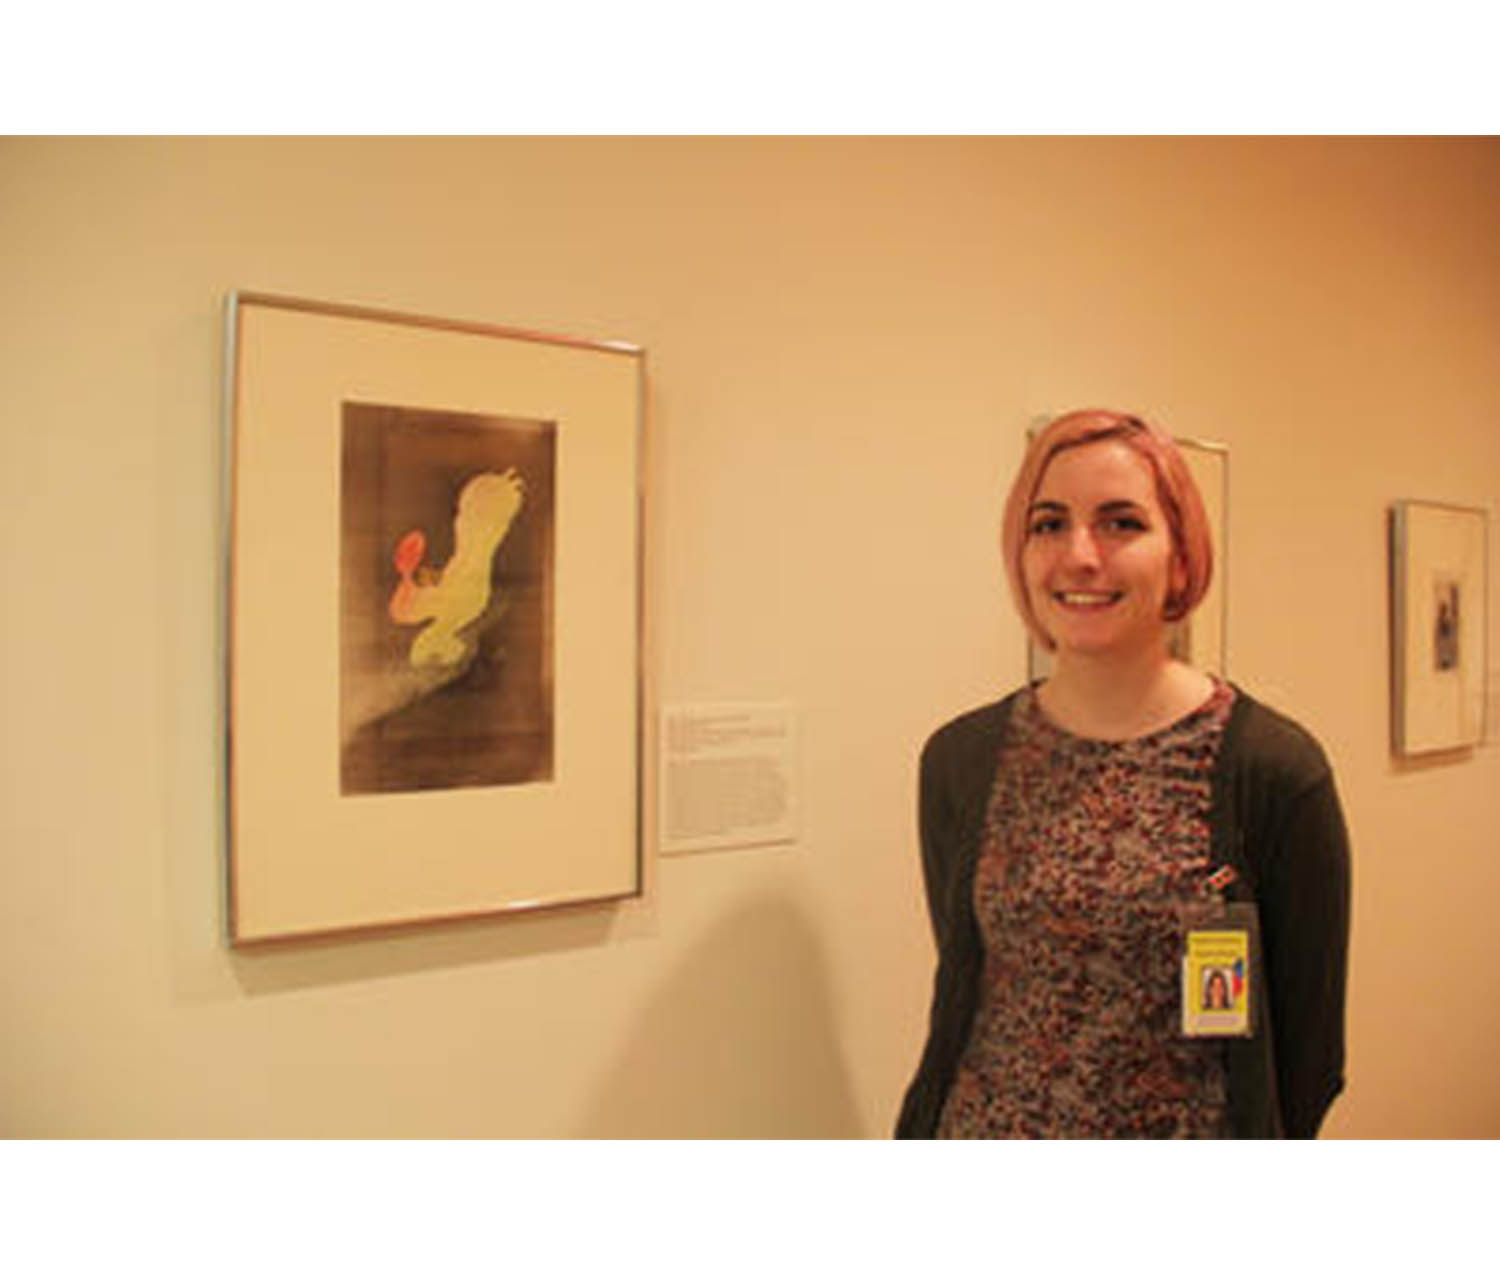 girl wearing a dress and a cardigan with a yellow ID tag clipped onto it, standing next to a framed print and smiling